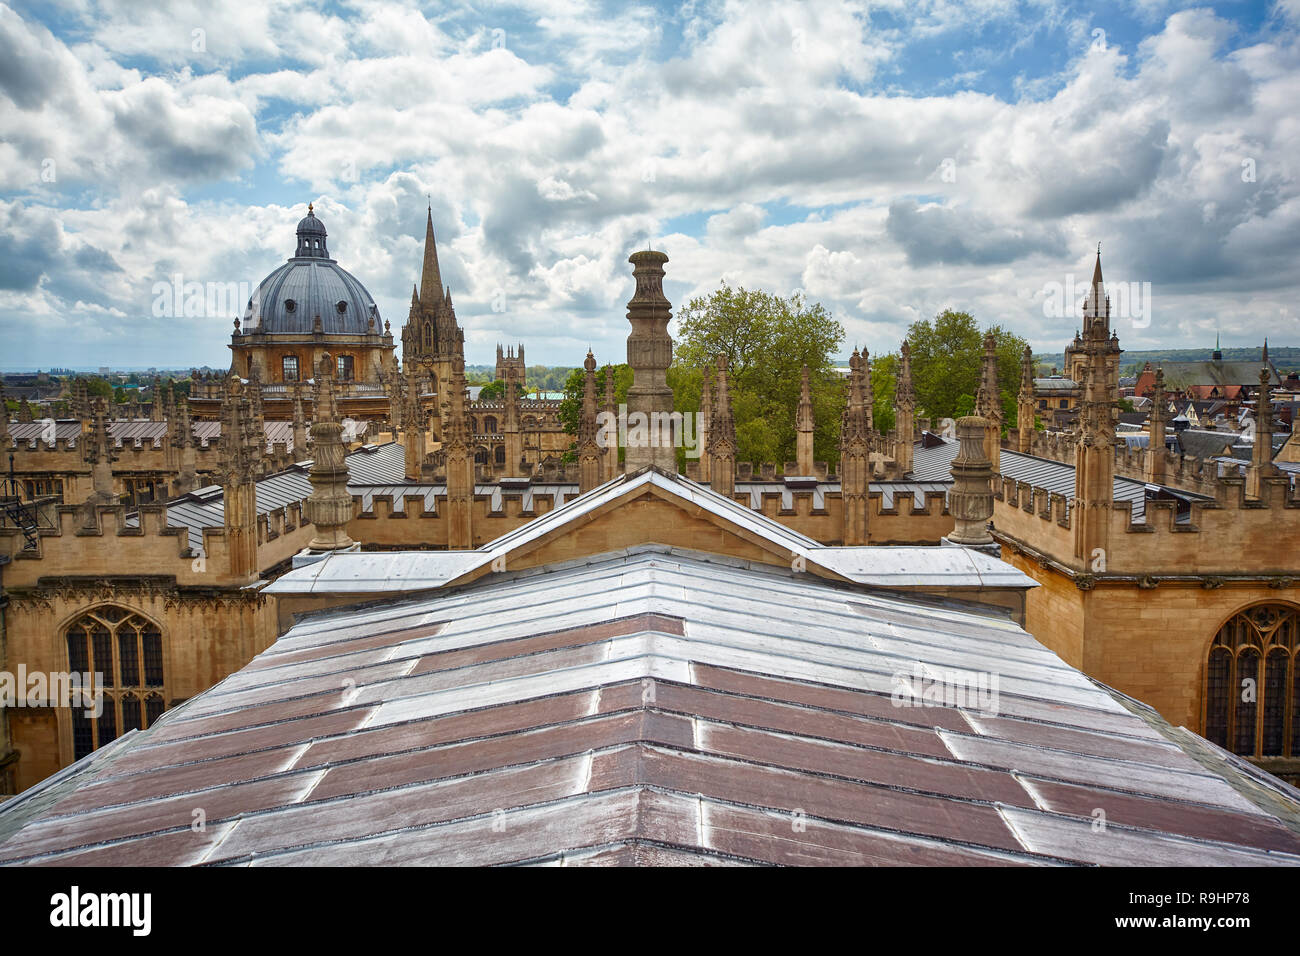 The view from the cupola of Sheldonian Theatre to the Bodleian Library and the dome of the Radcliffe Camera.  Oxford University. Oxford. England Stock Photo